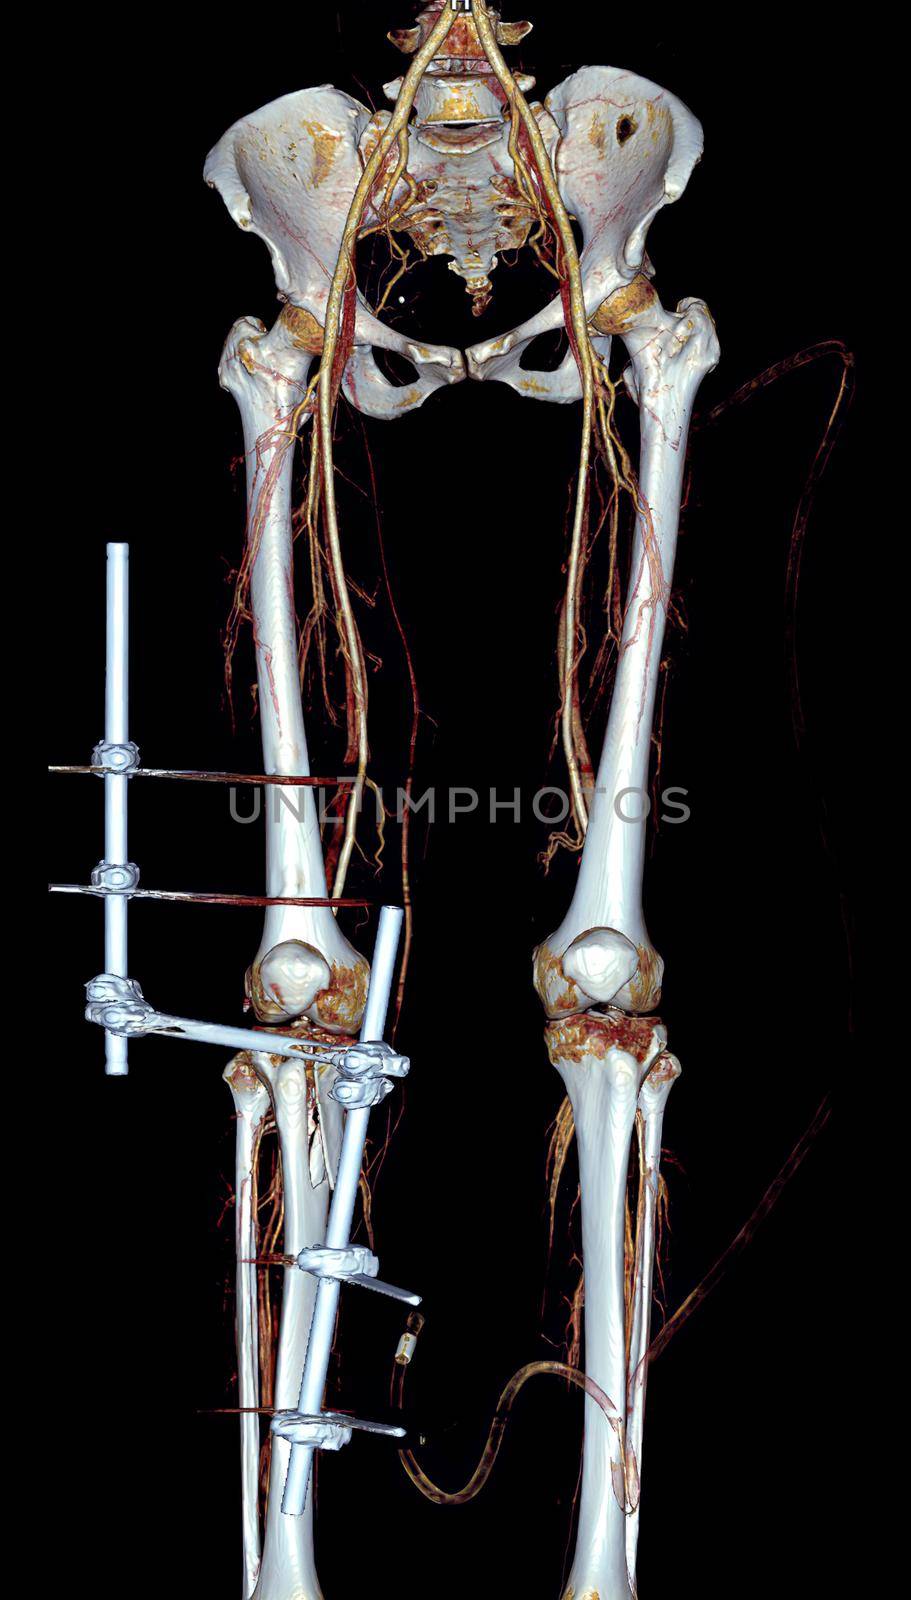 CTA femoral artery run off 3D rendering image of femoral artery for detect vasucular injury in traumatic patient.